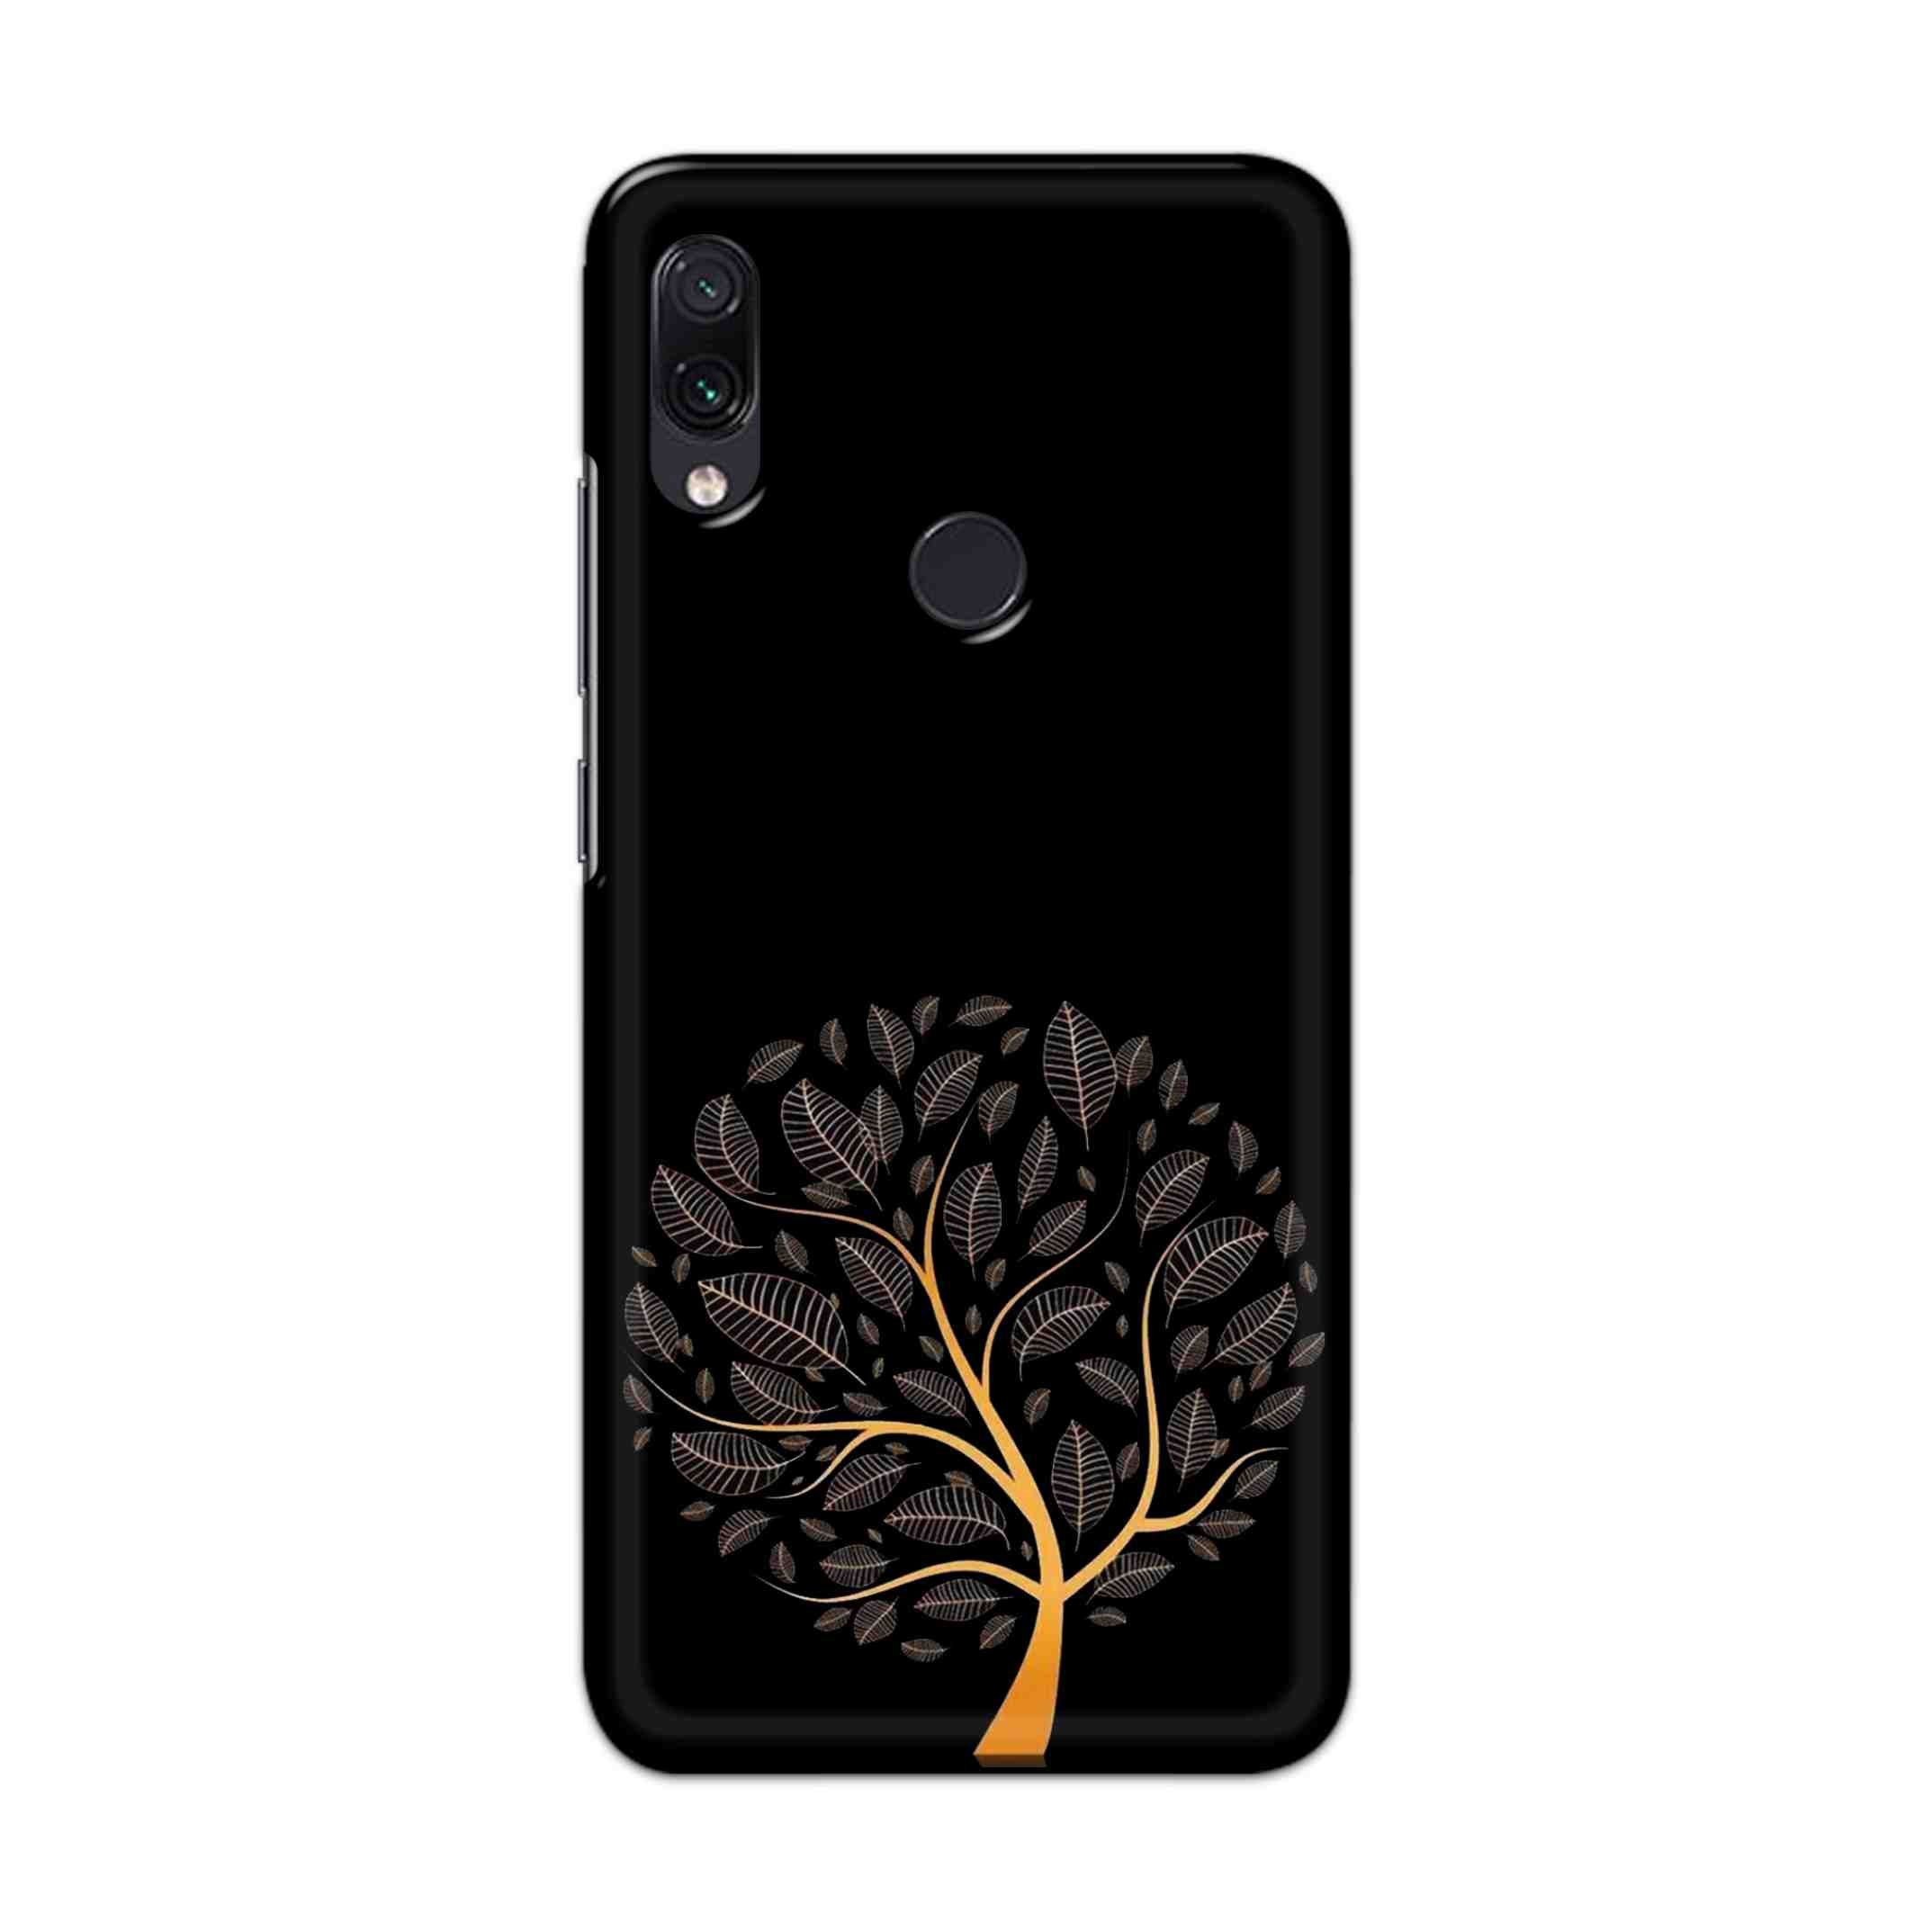 Buy Golden Tree Hard Back Mobile Phone Case Cover For Xiaomi Redmi 7 Online